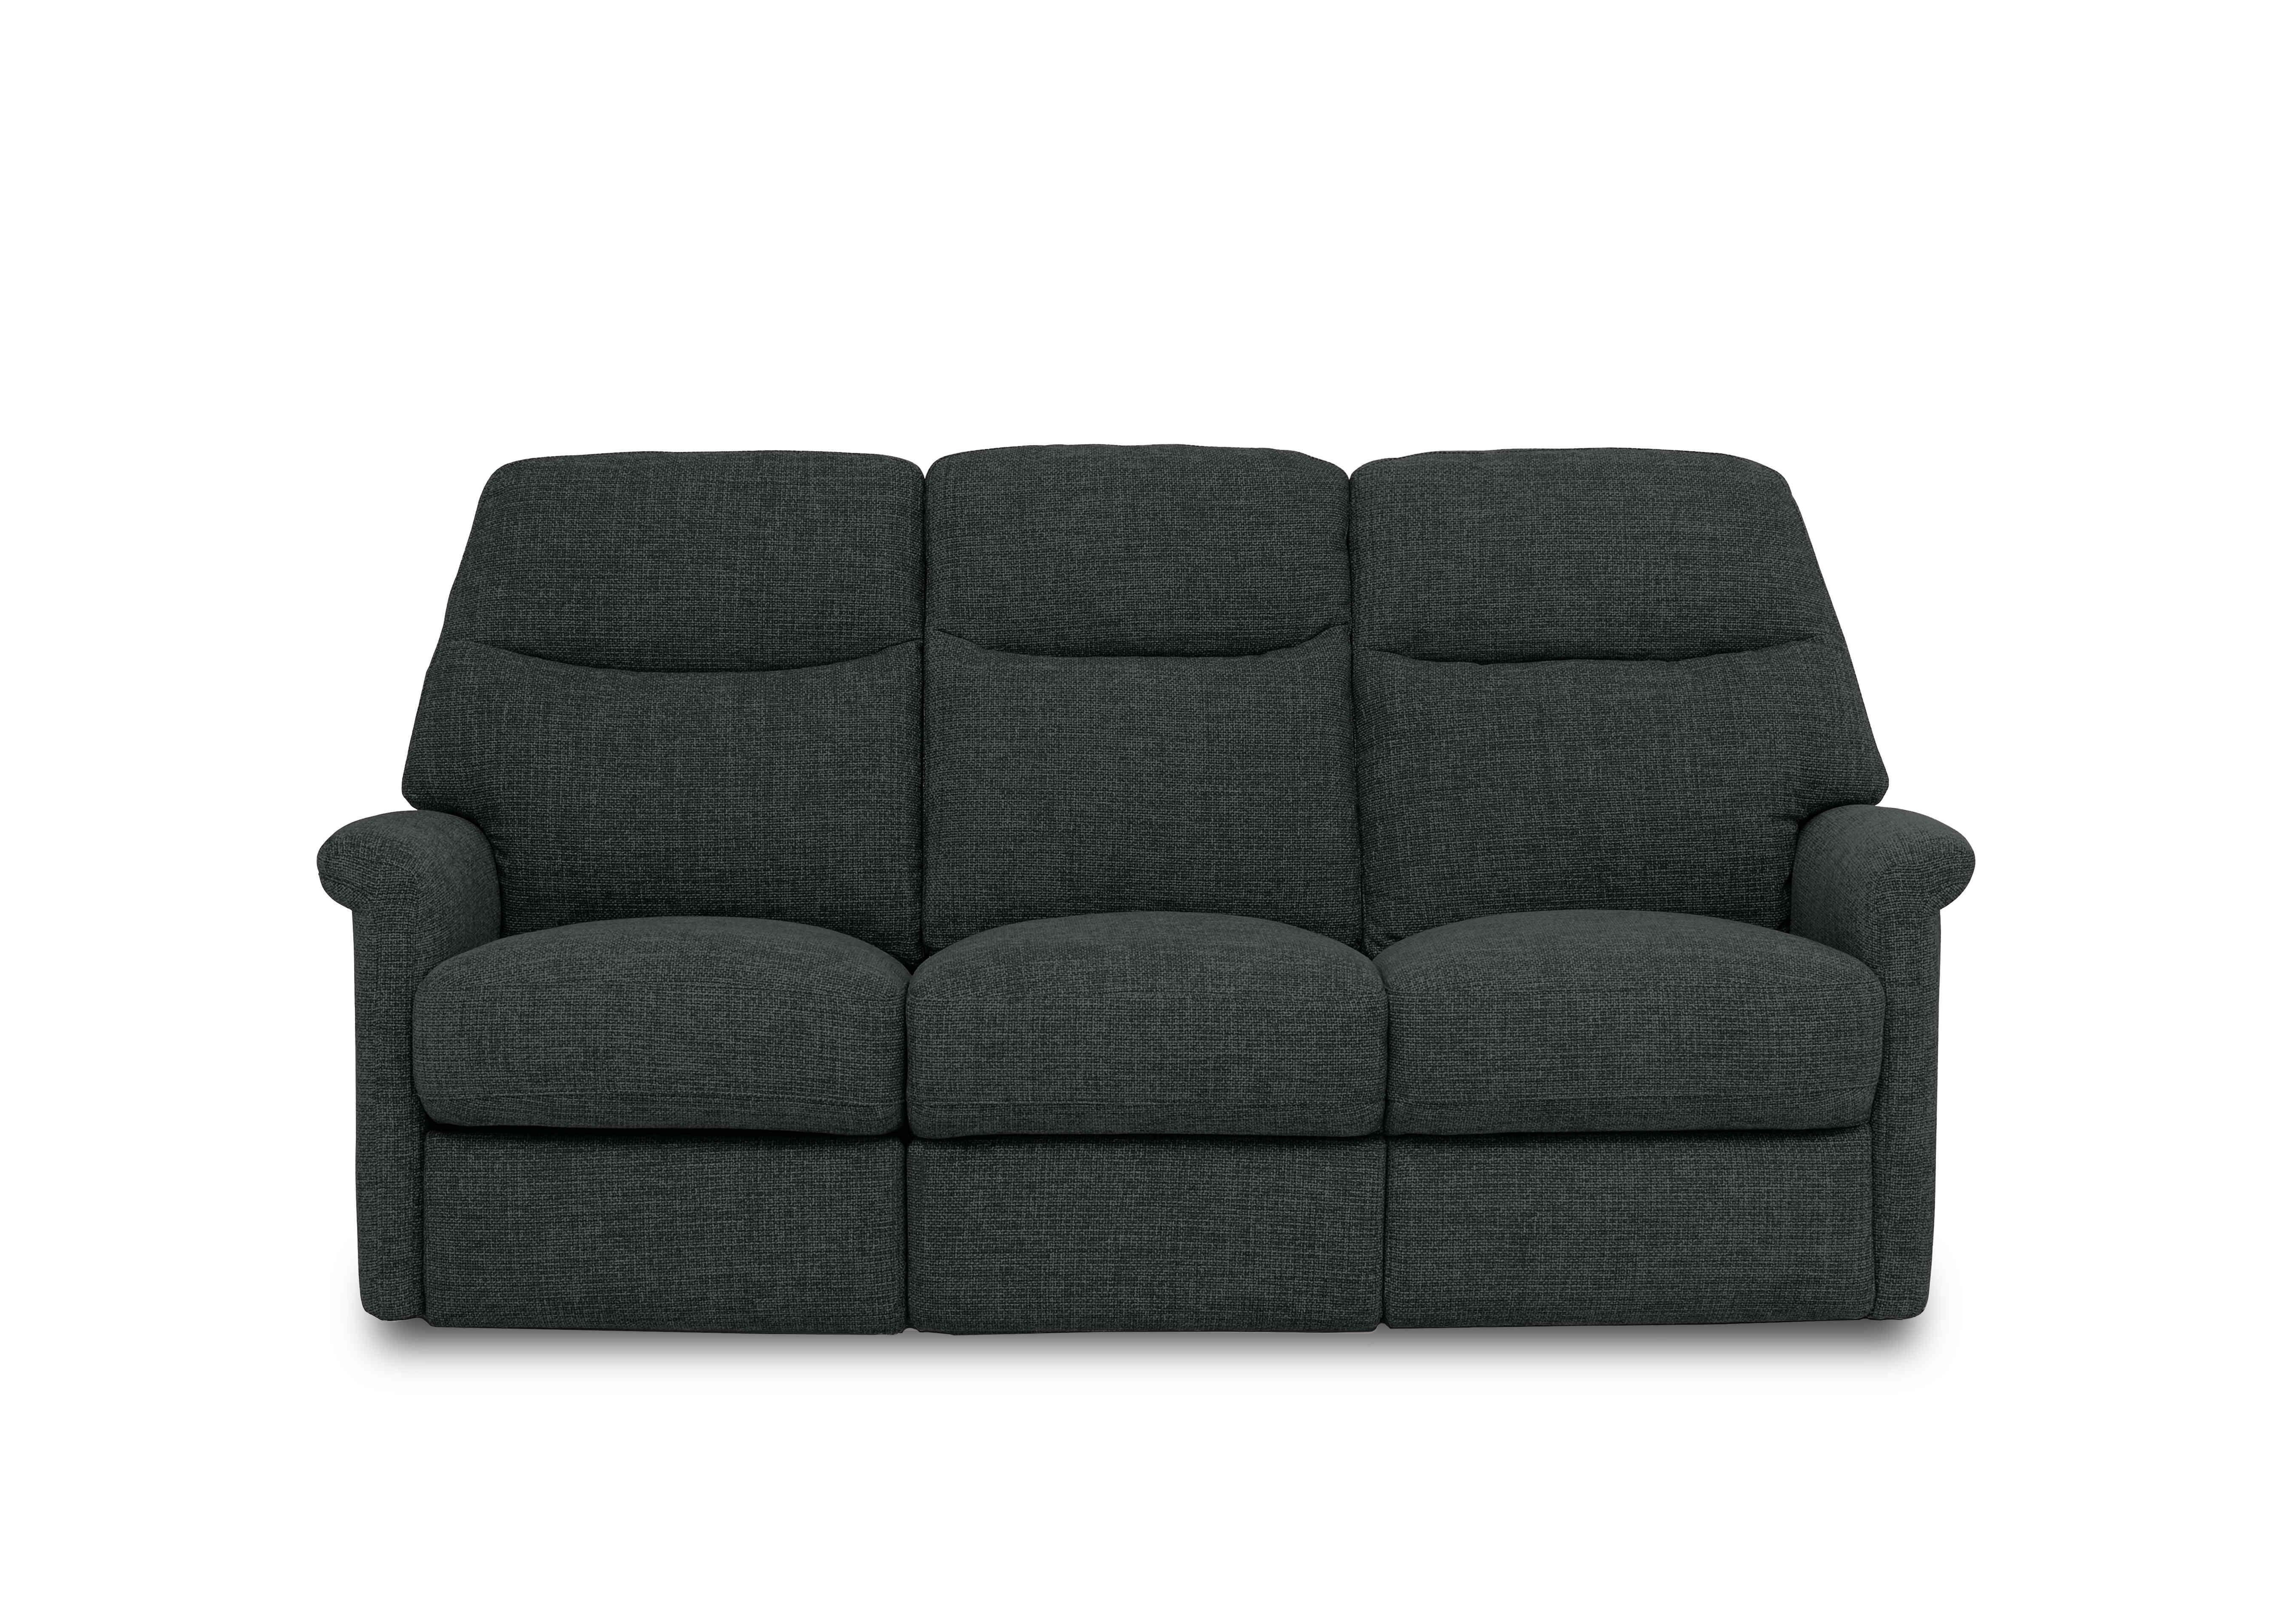 Compact Collection Lille 3 Seater Fabric Sofa in Fab-Cac-R463 Black Mica on Furniture Village